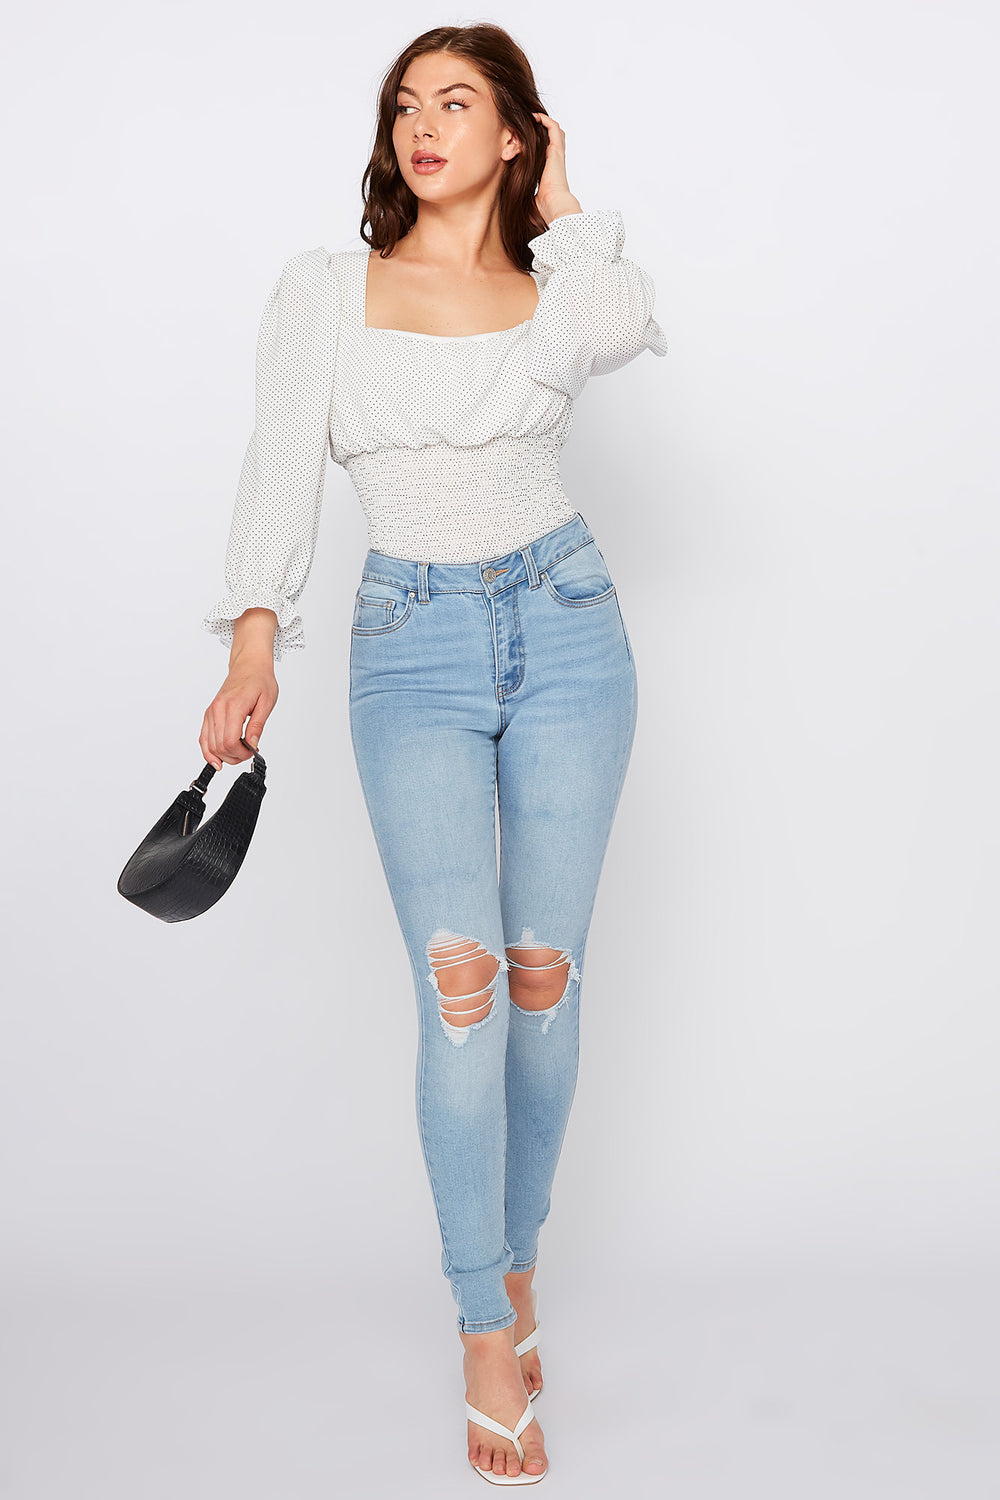 charlotte russe jeans